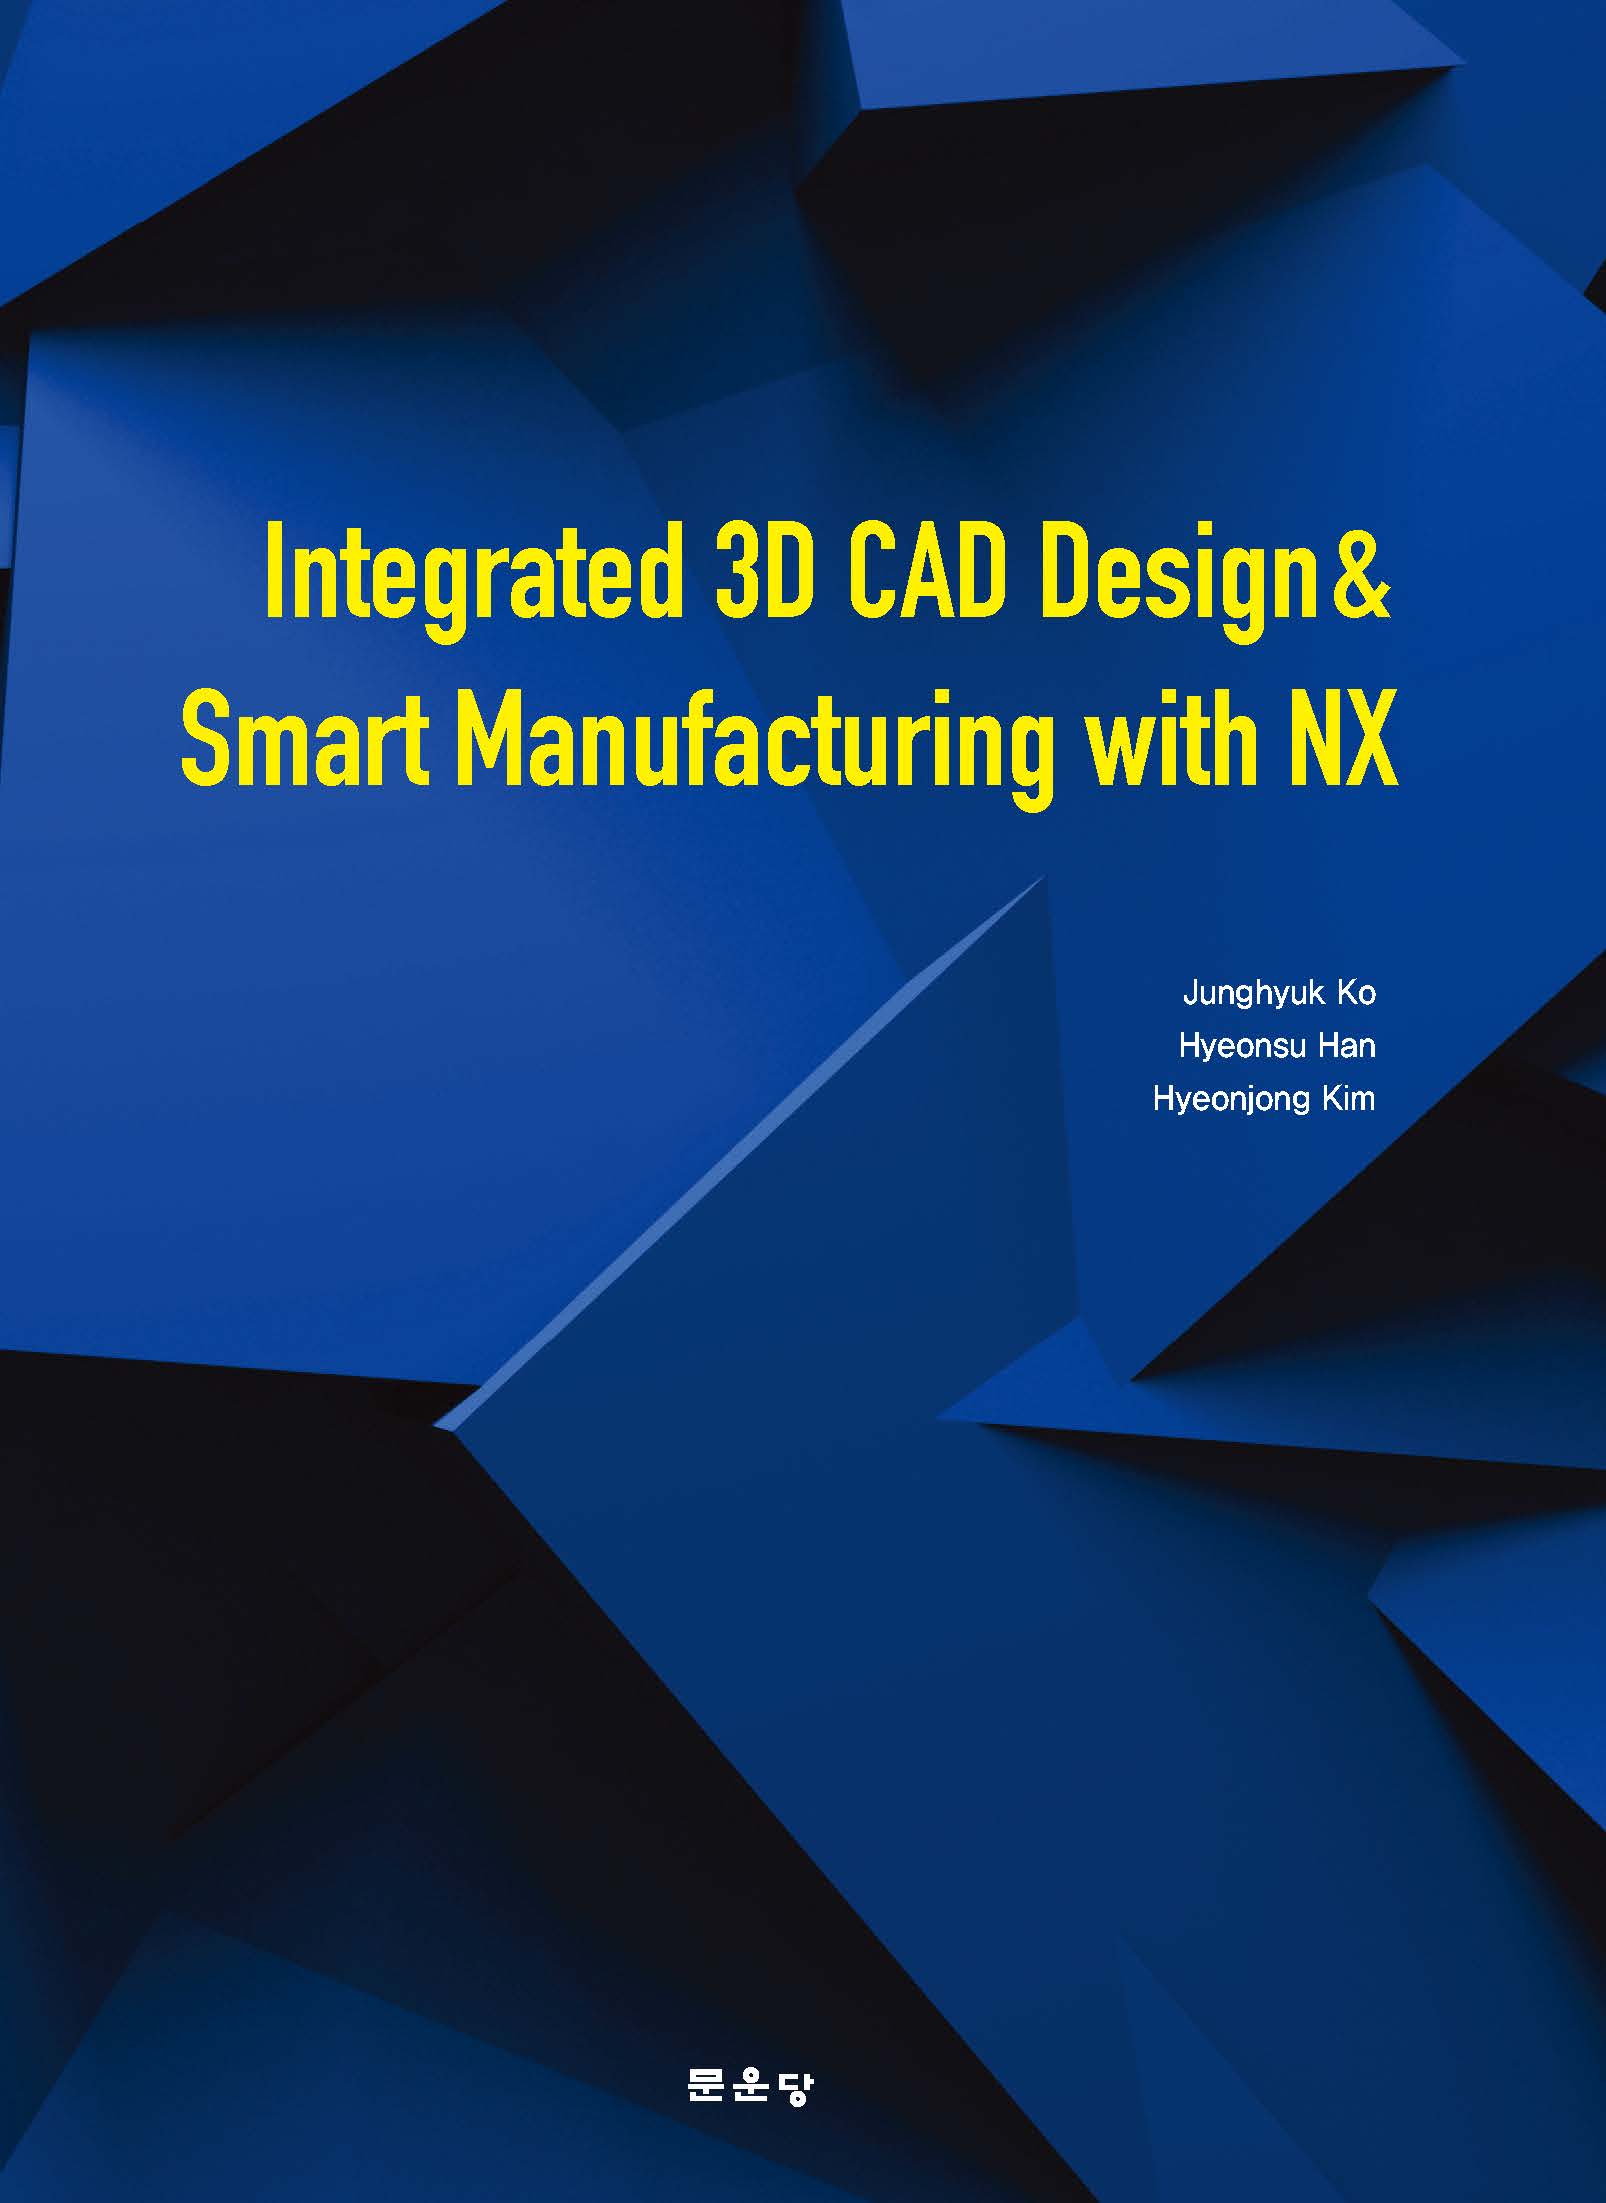 Integrated 3D CAD dseign & smart manufacturing with NX